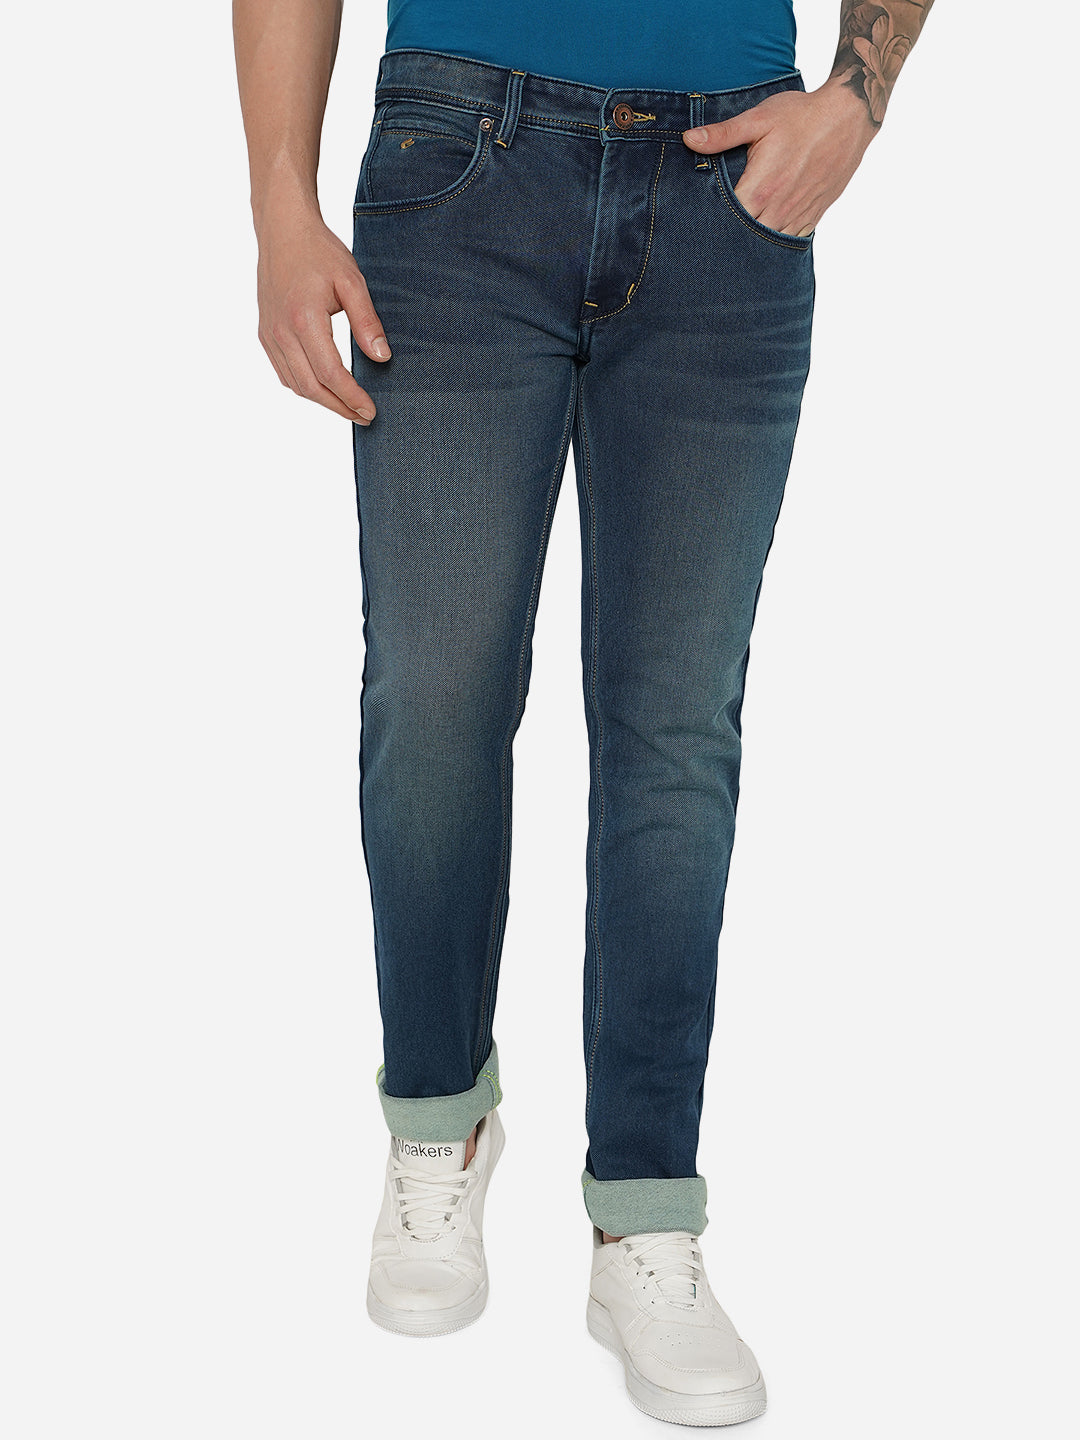 Wintage Blue Washed Narrow Fit Jeans | Greenfibre